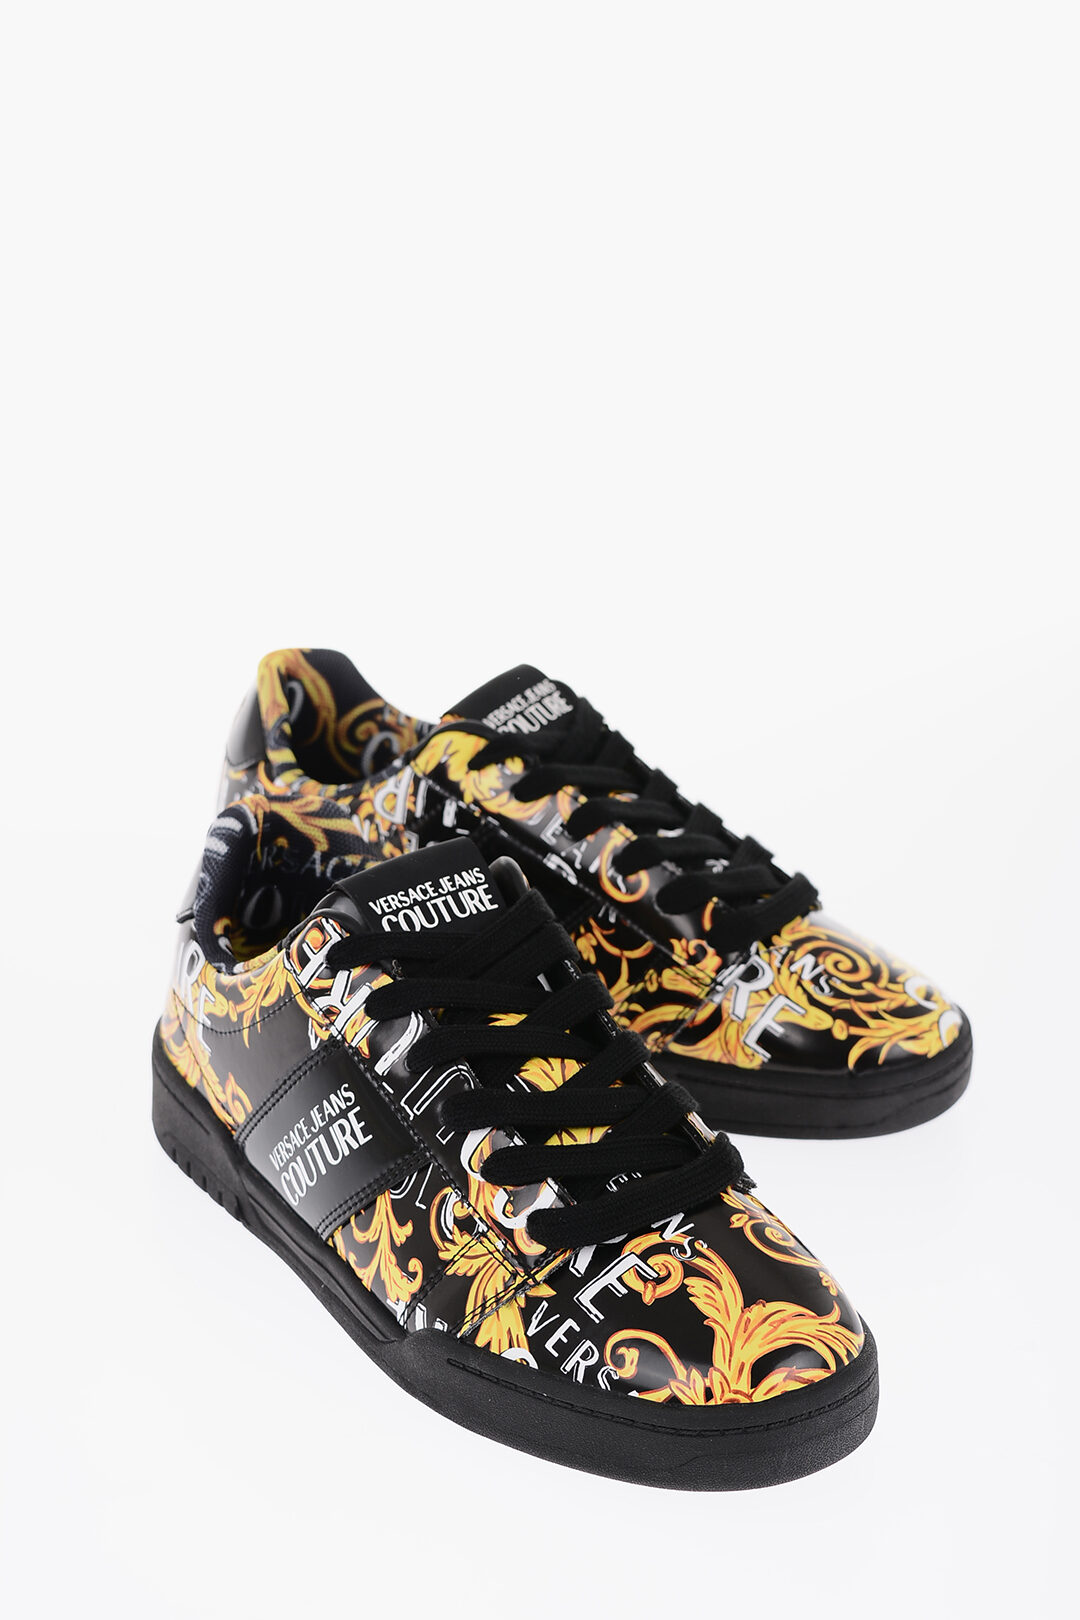 werkwoord labyrint bereik Versace JEANS COUTURE Baroque Motif Patent Leather BROOKLYN Low-Top  Sneakers men - Glamood Outlet